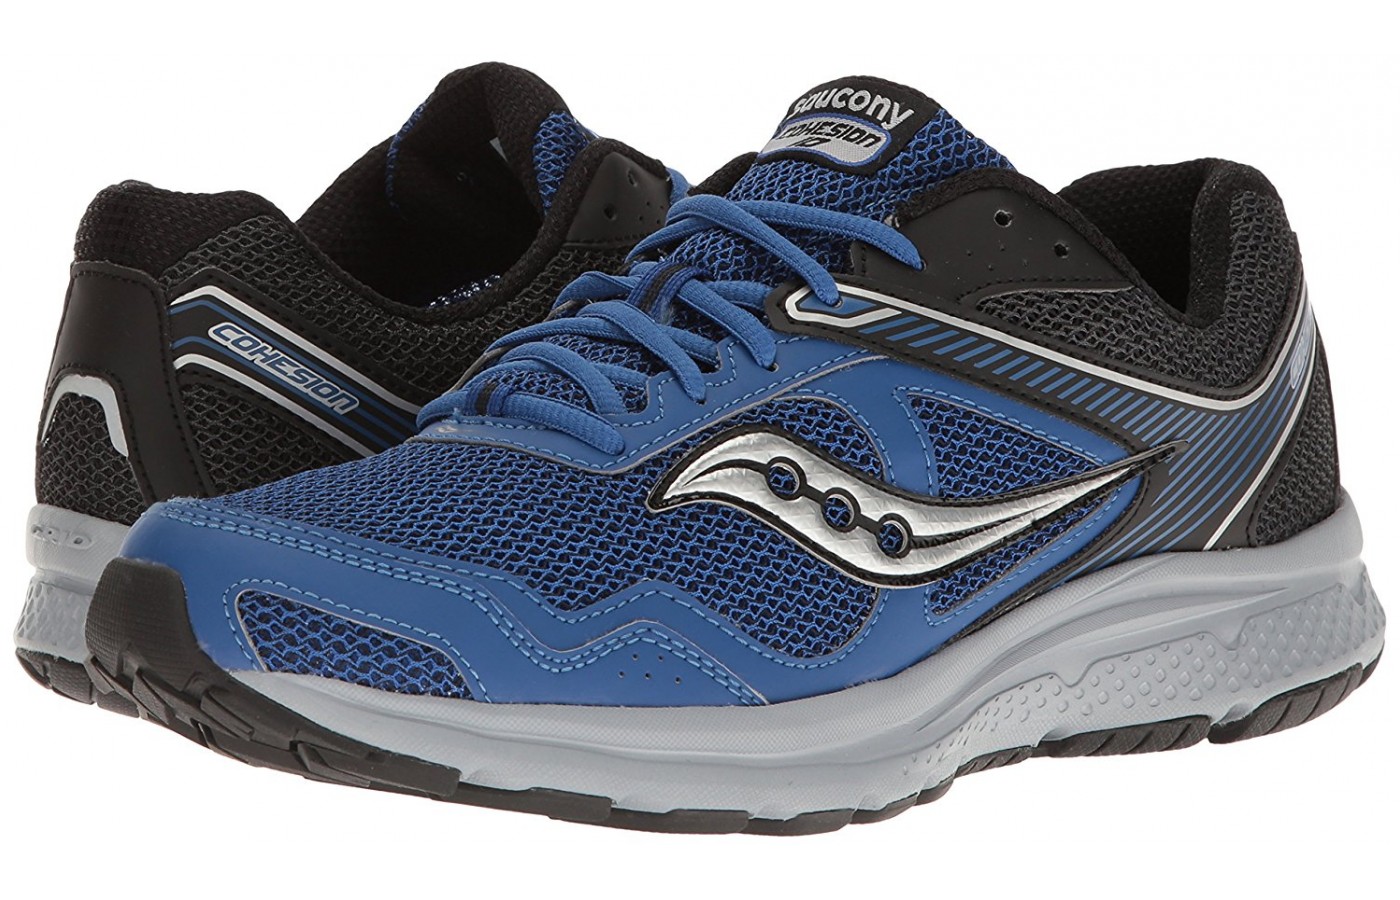 Saucony Cohesion 10 Tested for 